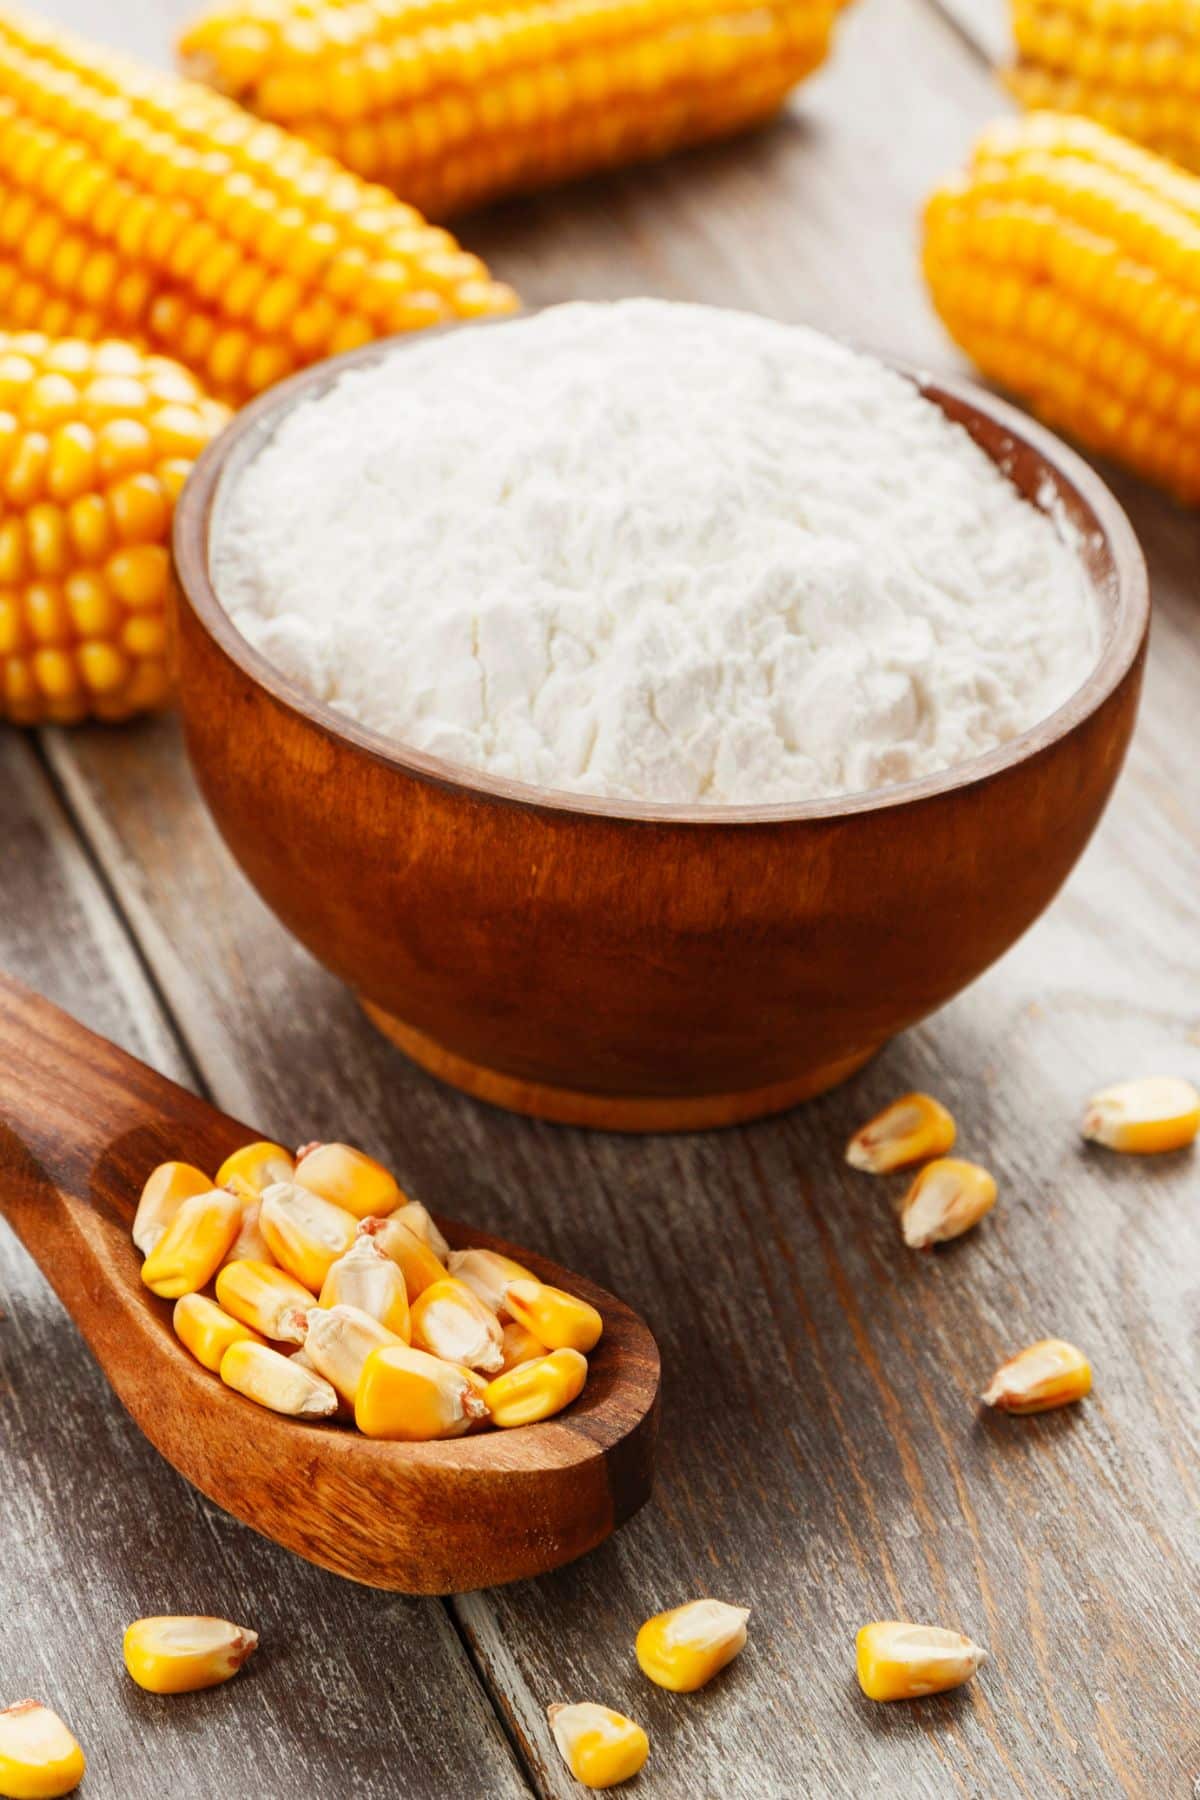 Spoonful of corn kernels with bowl of cornstarch.